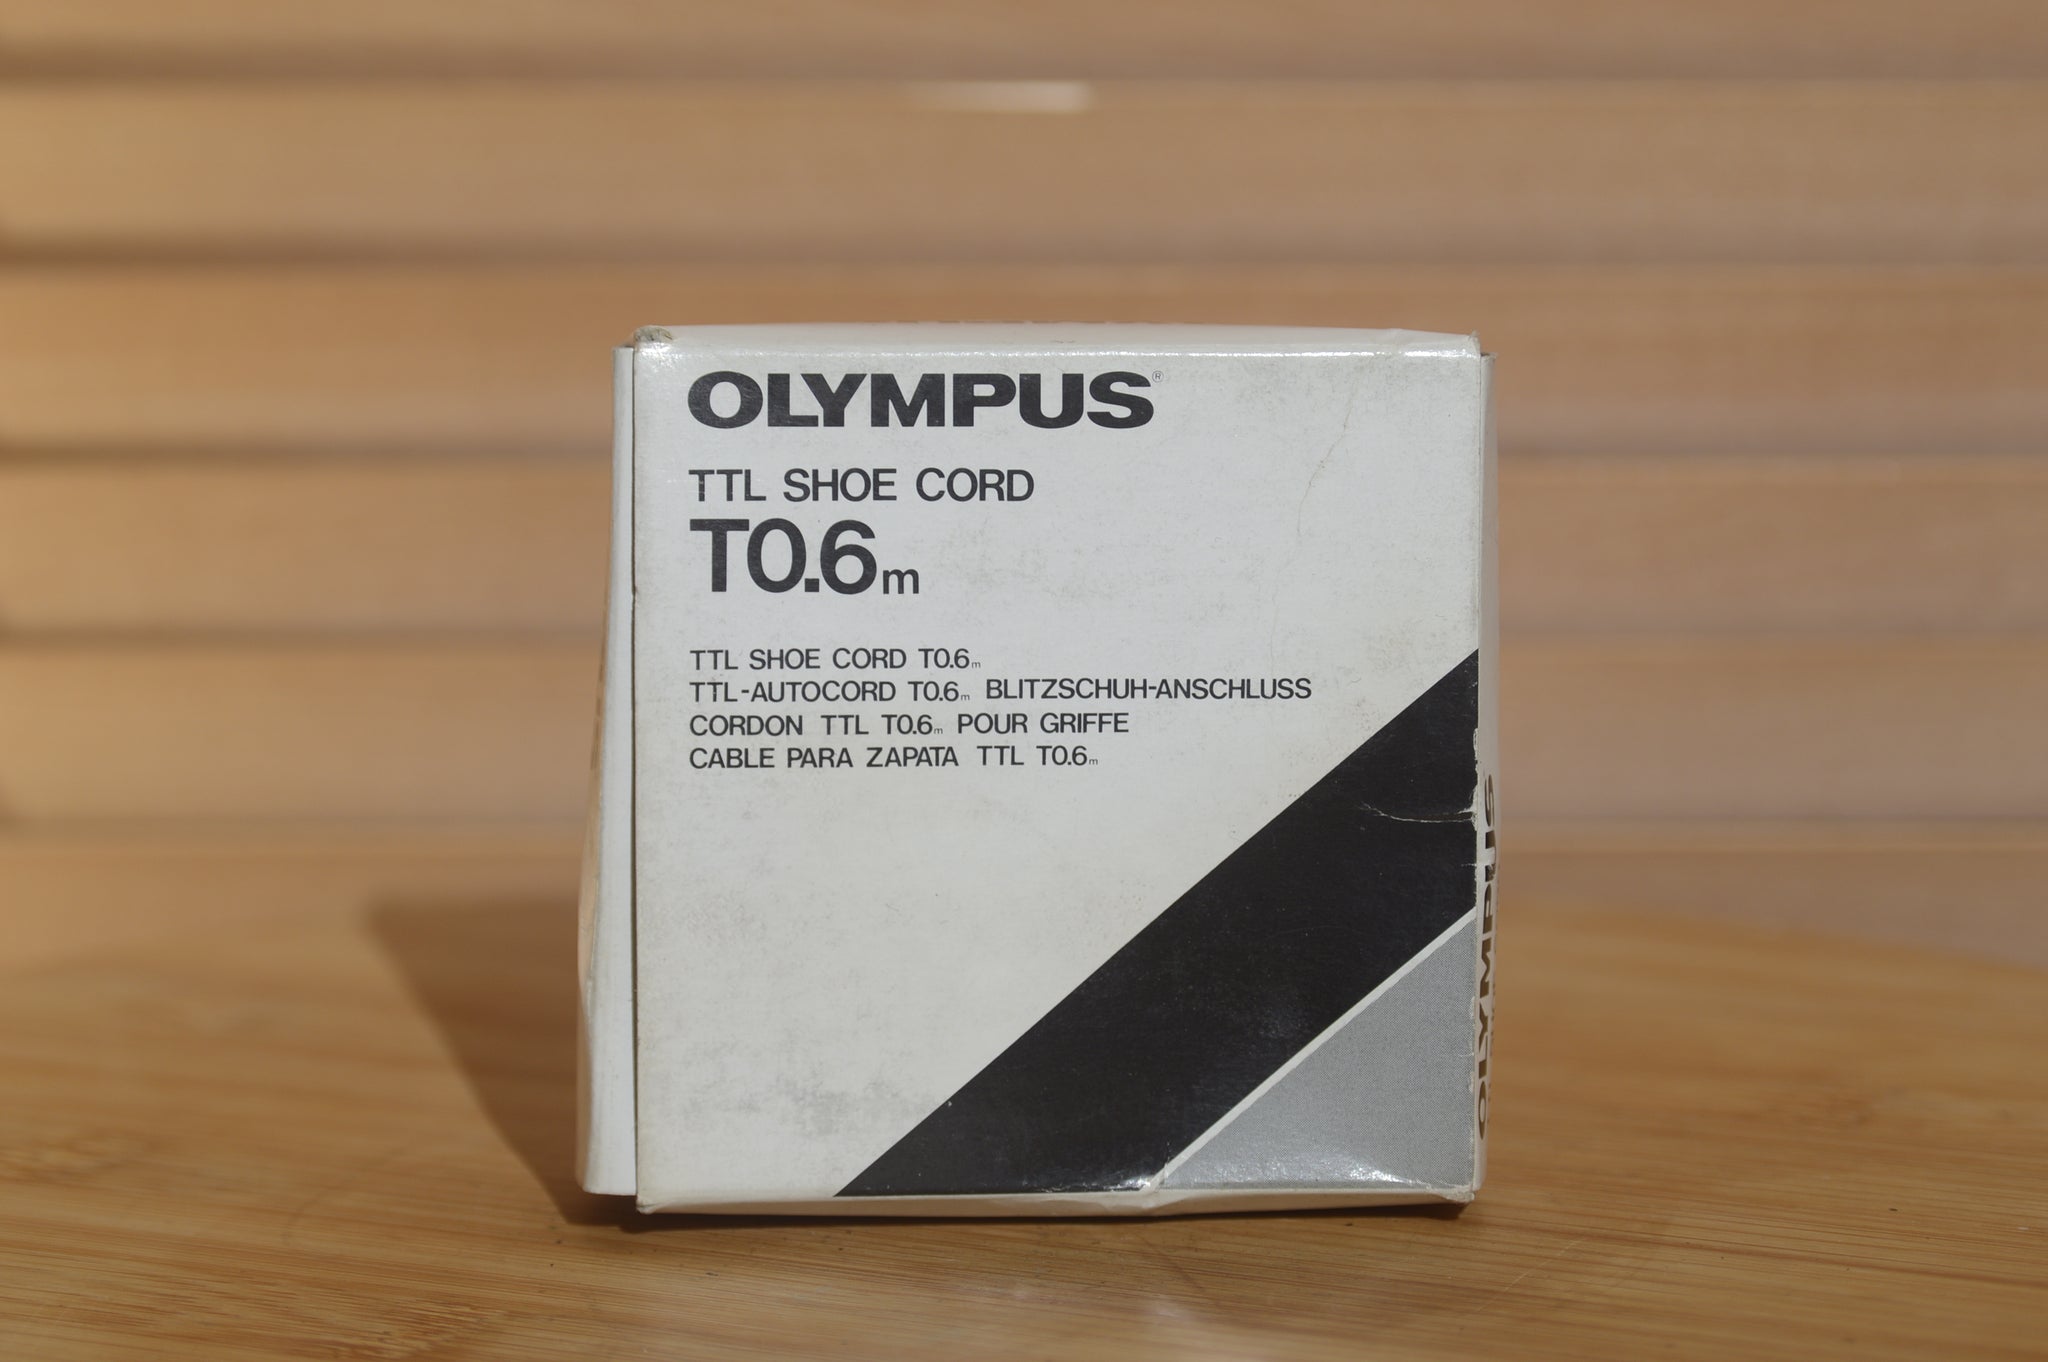 Boxed Olympus TTL Shoe Cord T0.6m. Comes with Instruction manual. - Rewind Cameras 